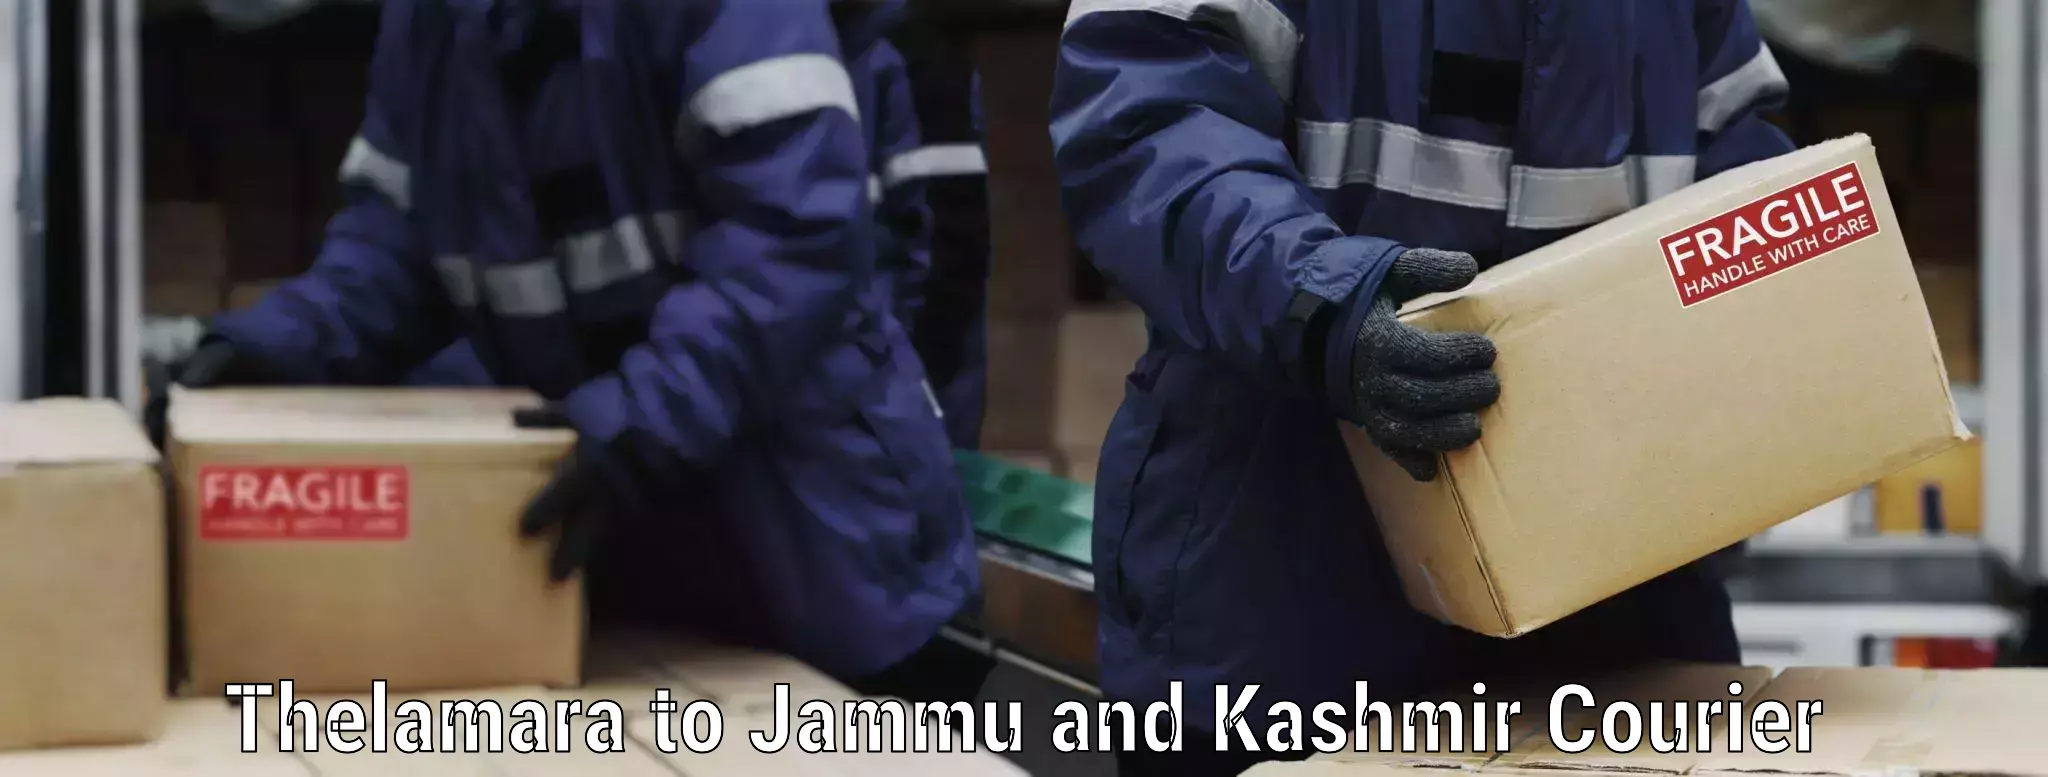 Efficient packing and moving Thelamara to Jammu and Kashmir